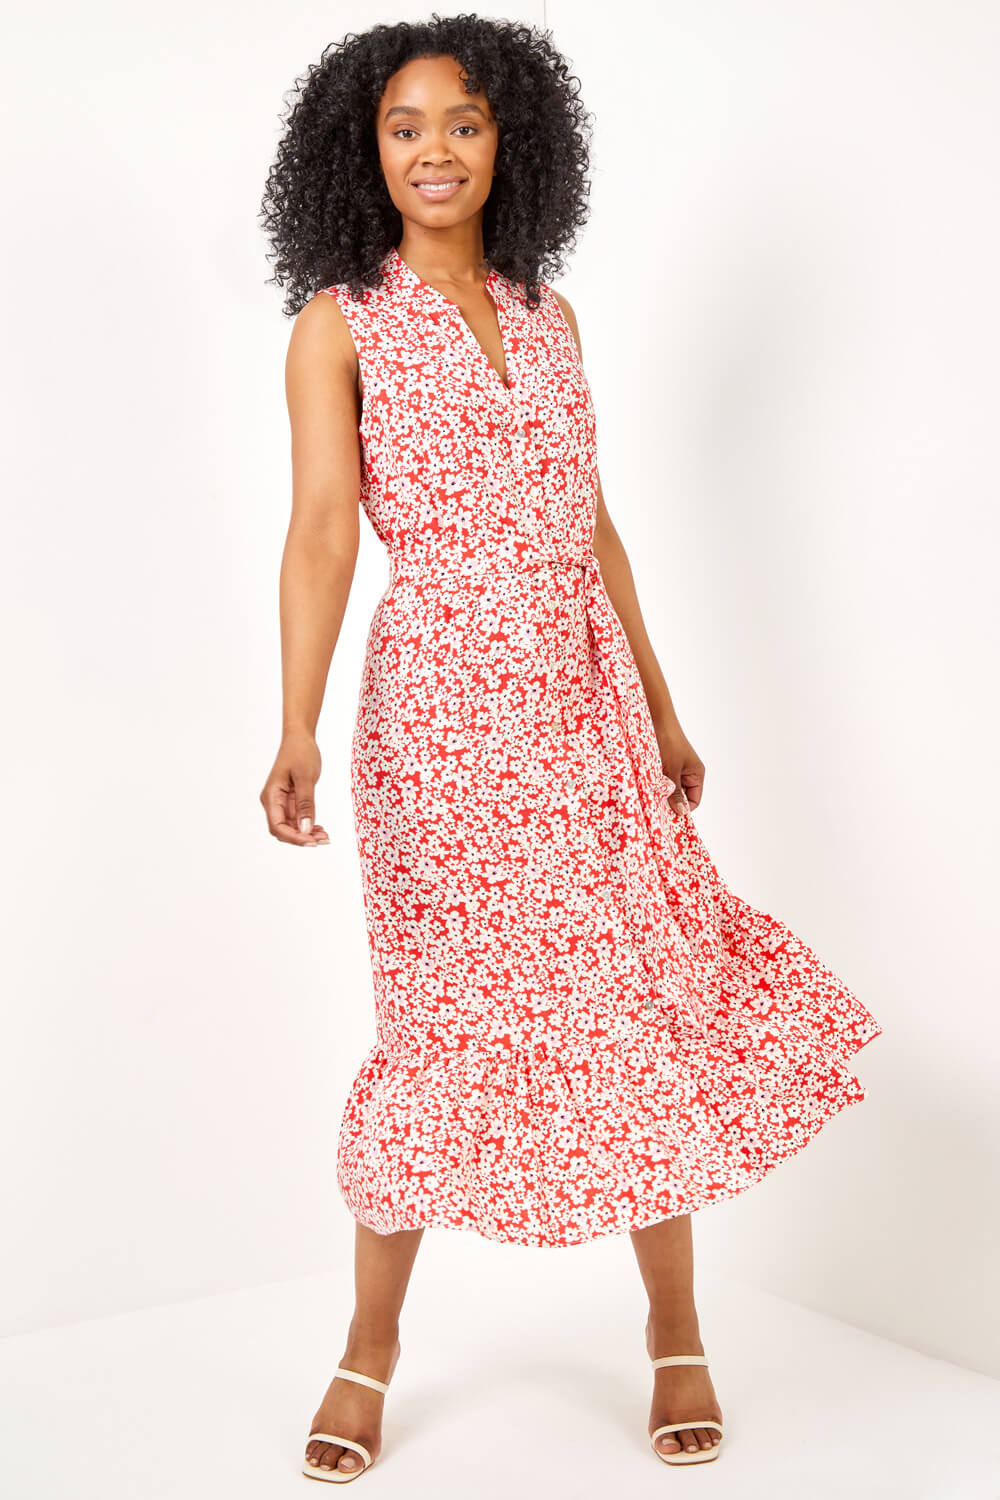 Red Petite Ditsy Floral Print Frill Tiered Dress, Image 2 of 5